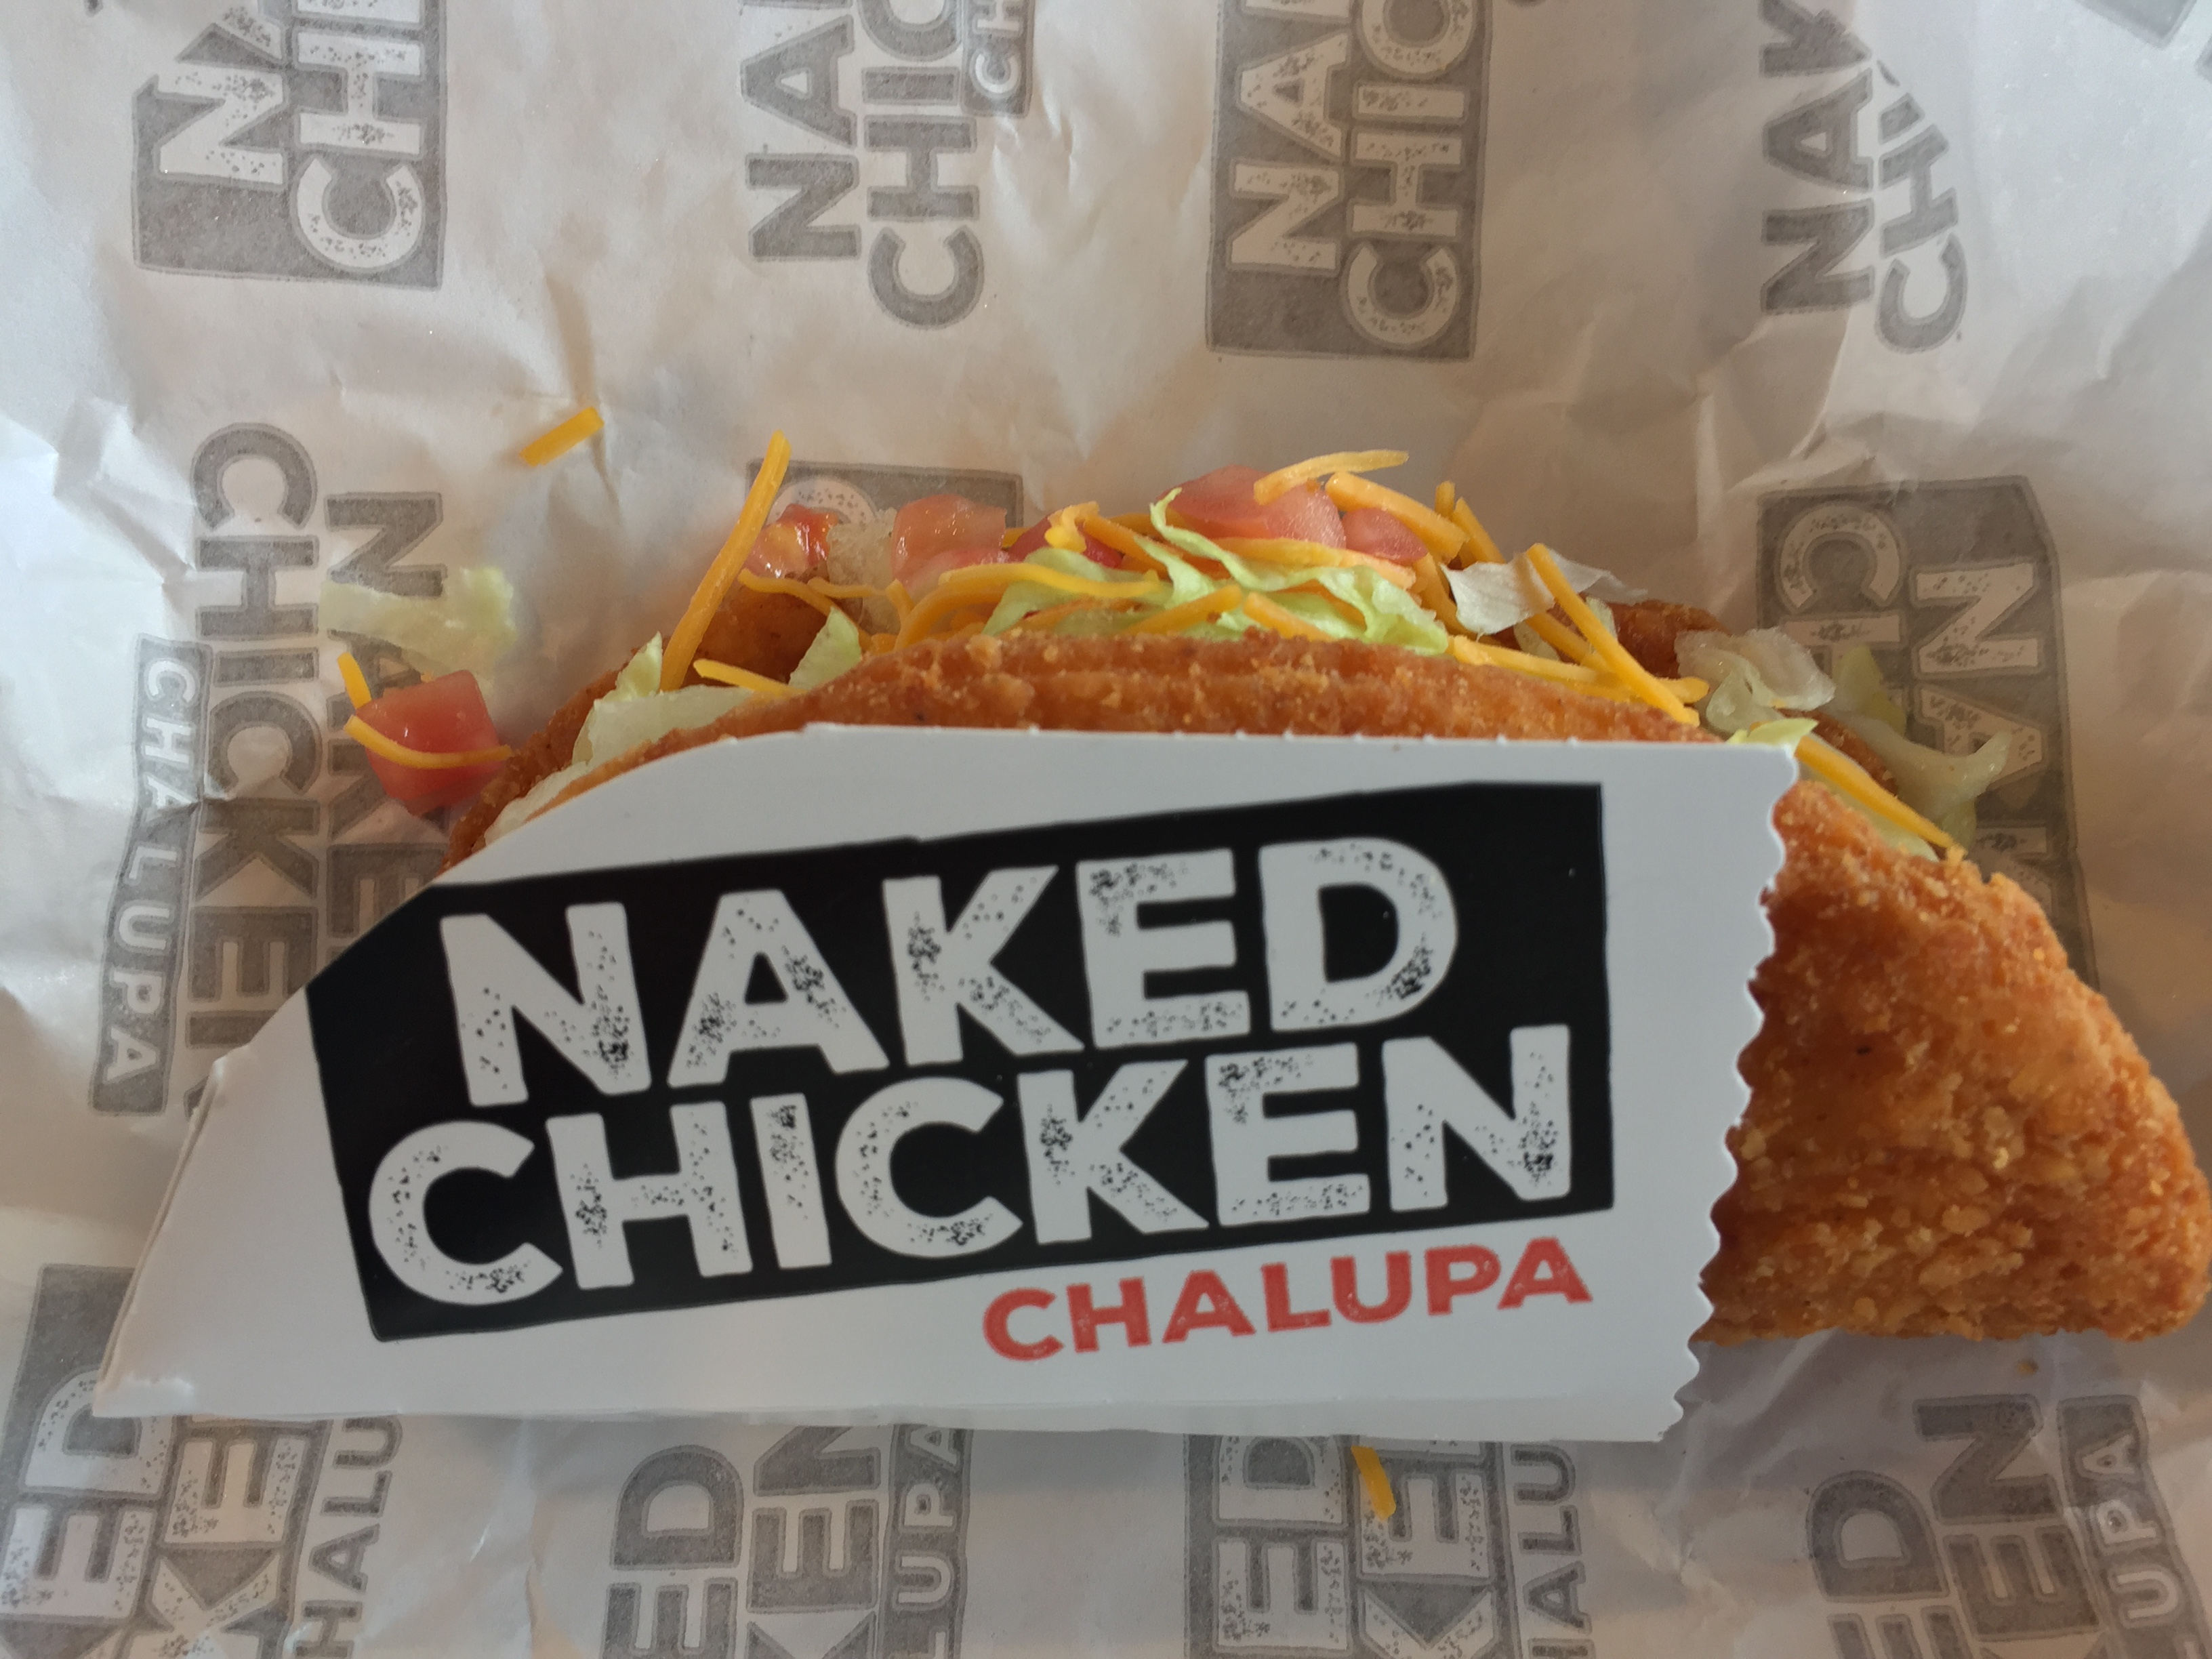 Naked chicken chalupa looked great